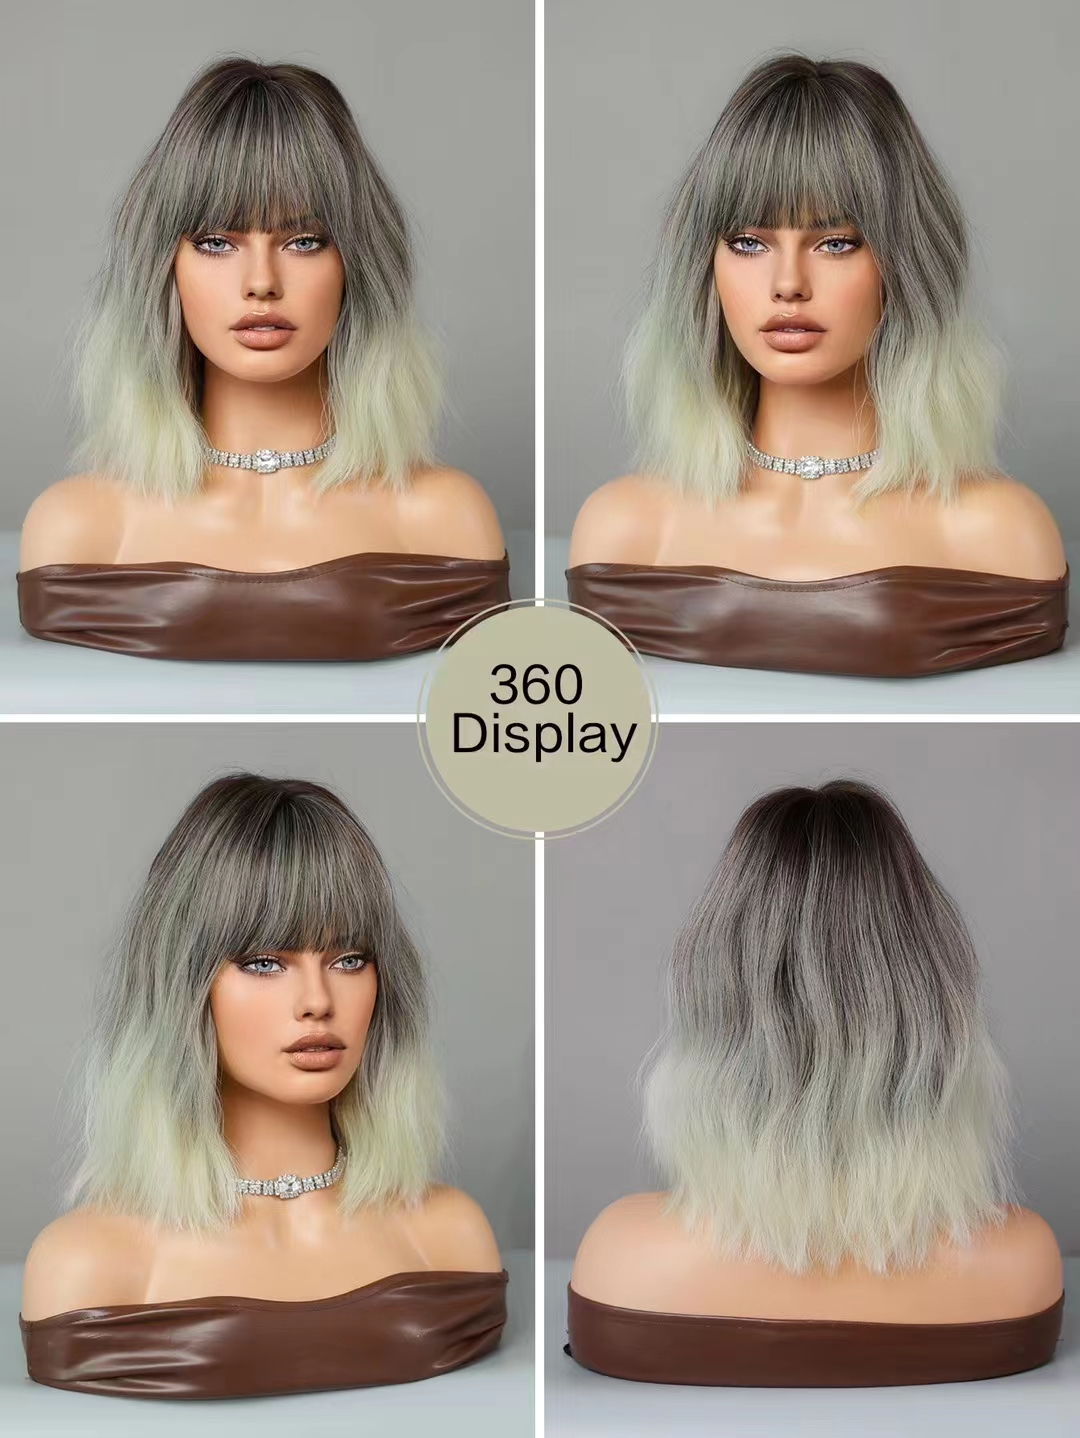 Silver-white synthetic wig by Yinraohai, featuring short wavy hair and Japanese and Korean style bangs, with a gradient effect, ready to wear